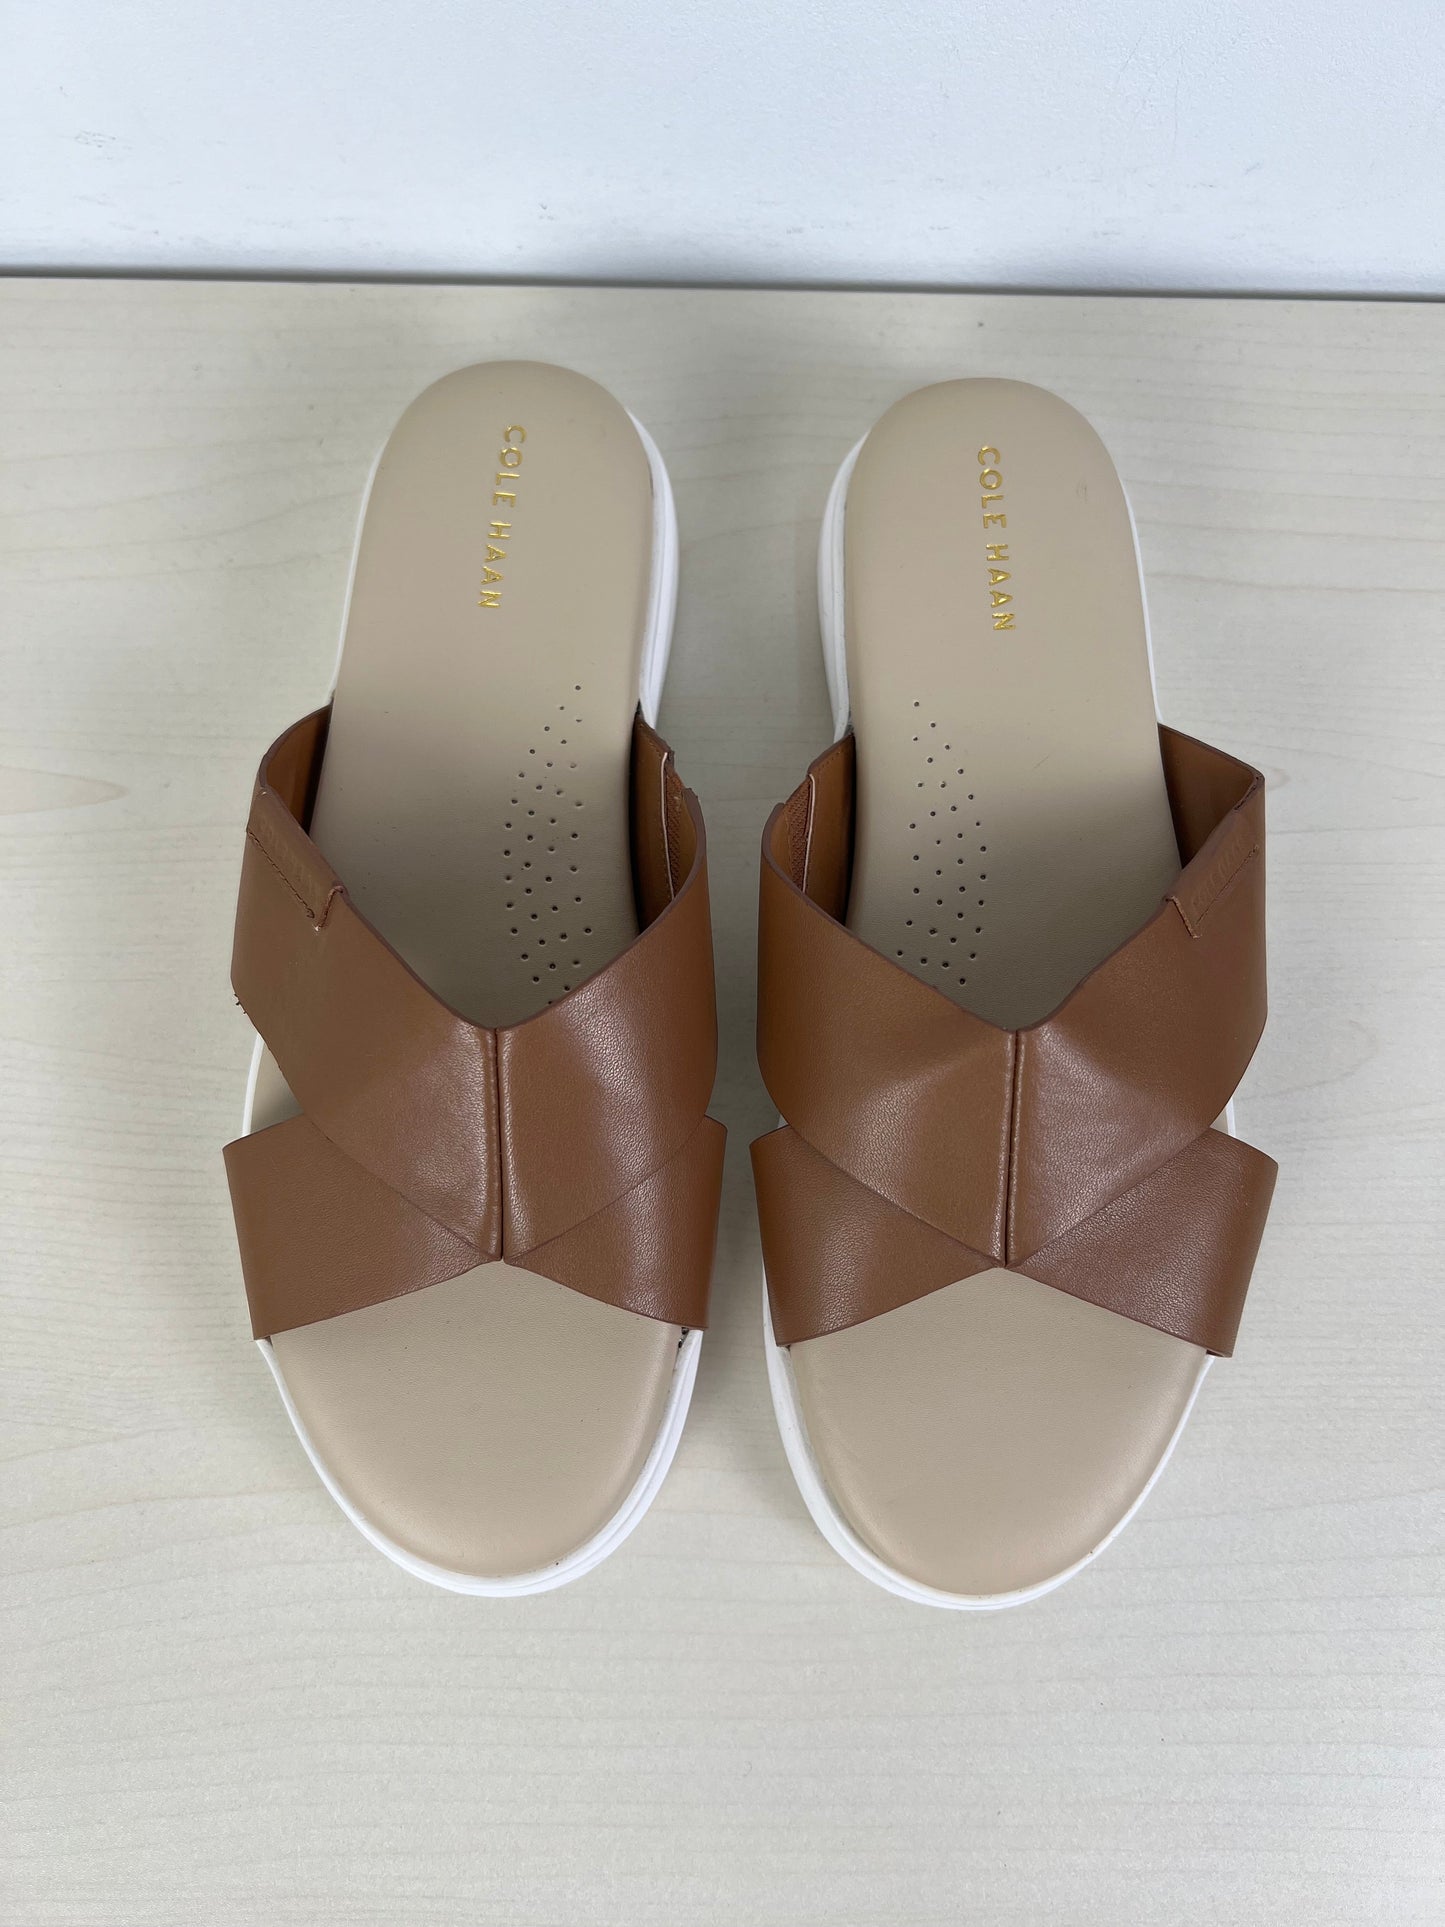 Brown & White Sandals Flats Cole-haan, Size 8